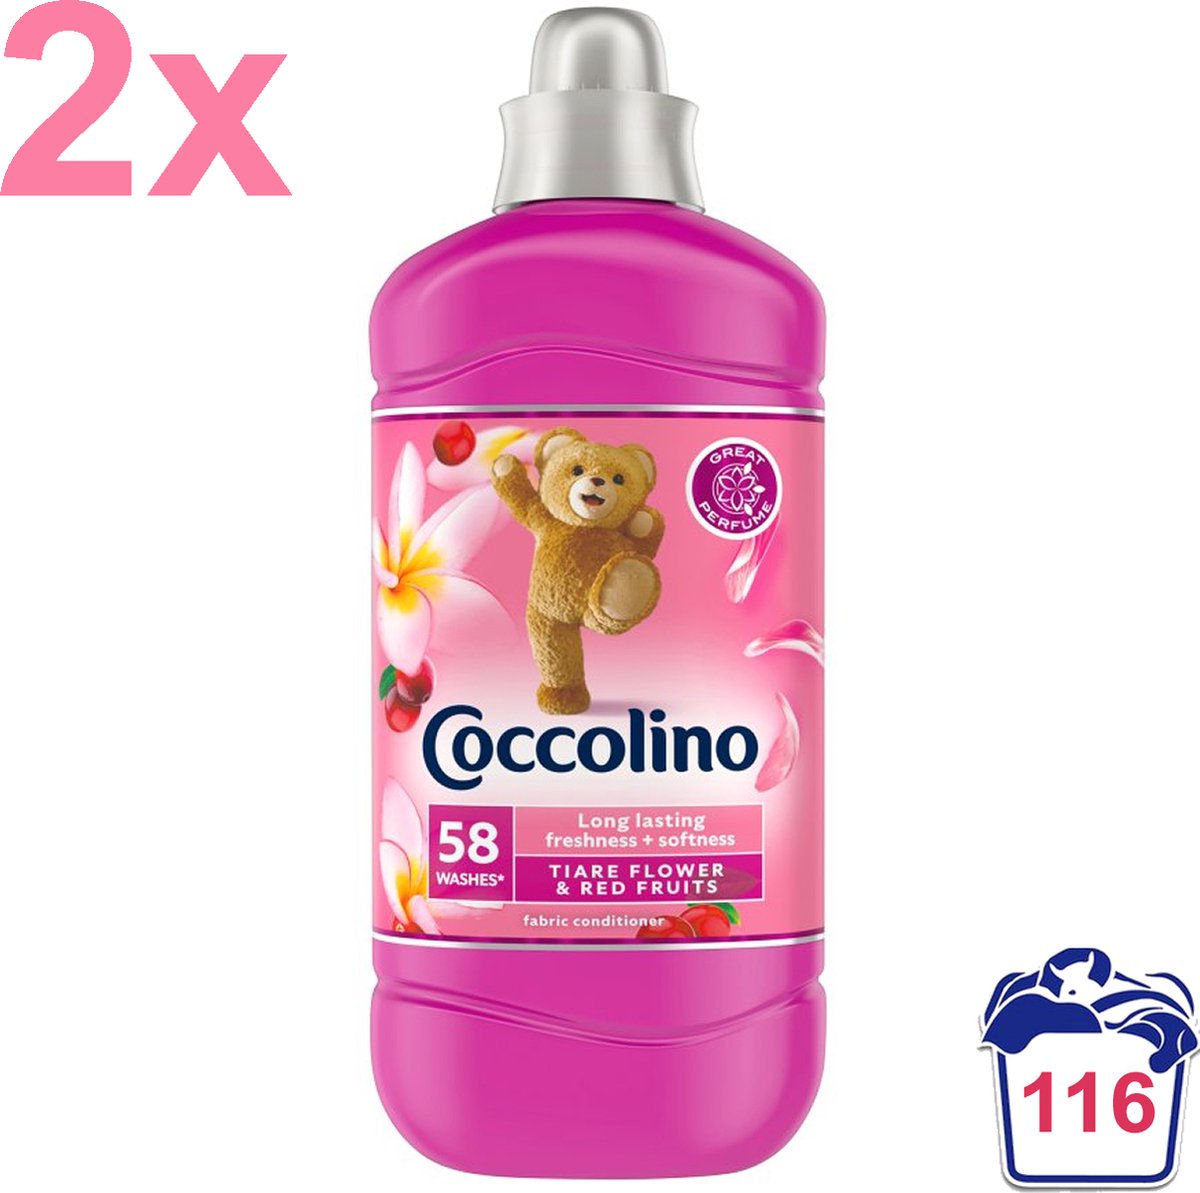 Coccolino Creations Tiare Flower & Red Fruits - Wasverzachter - 2,9L - 116 Wasbeurten